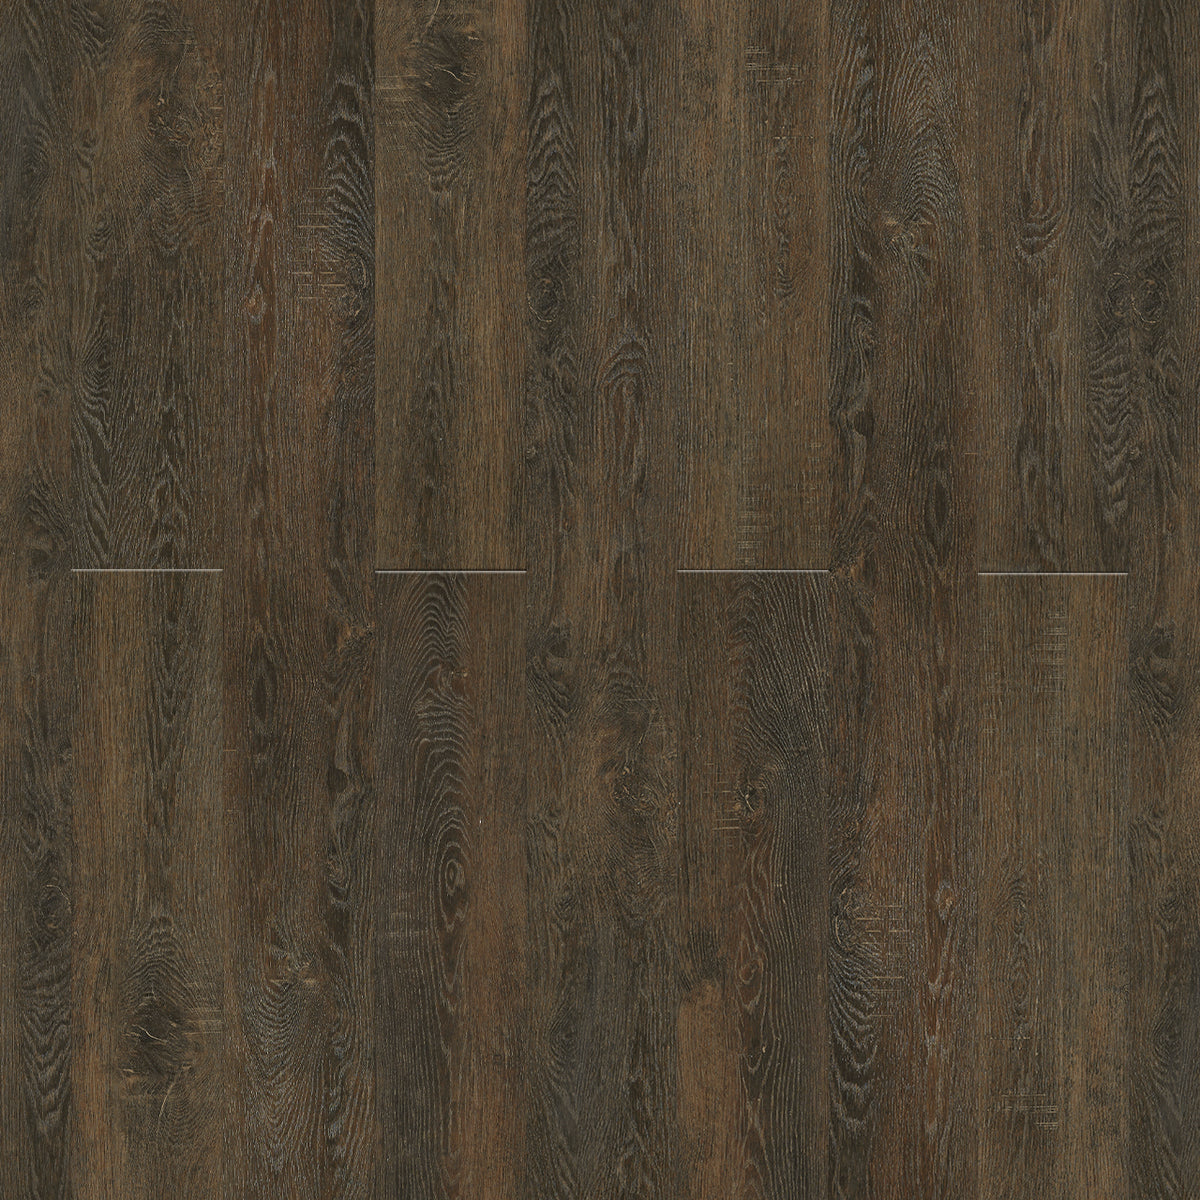 Engineered Floors - Triumph Collection - Bella Sera - 9 in. x 72 in. - Palazzio